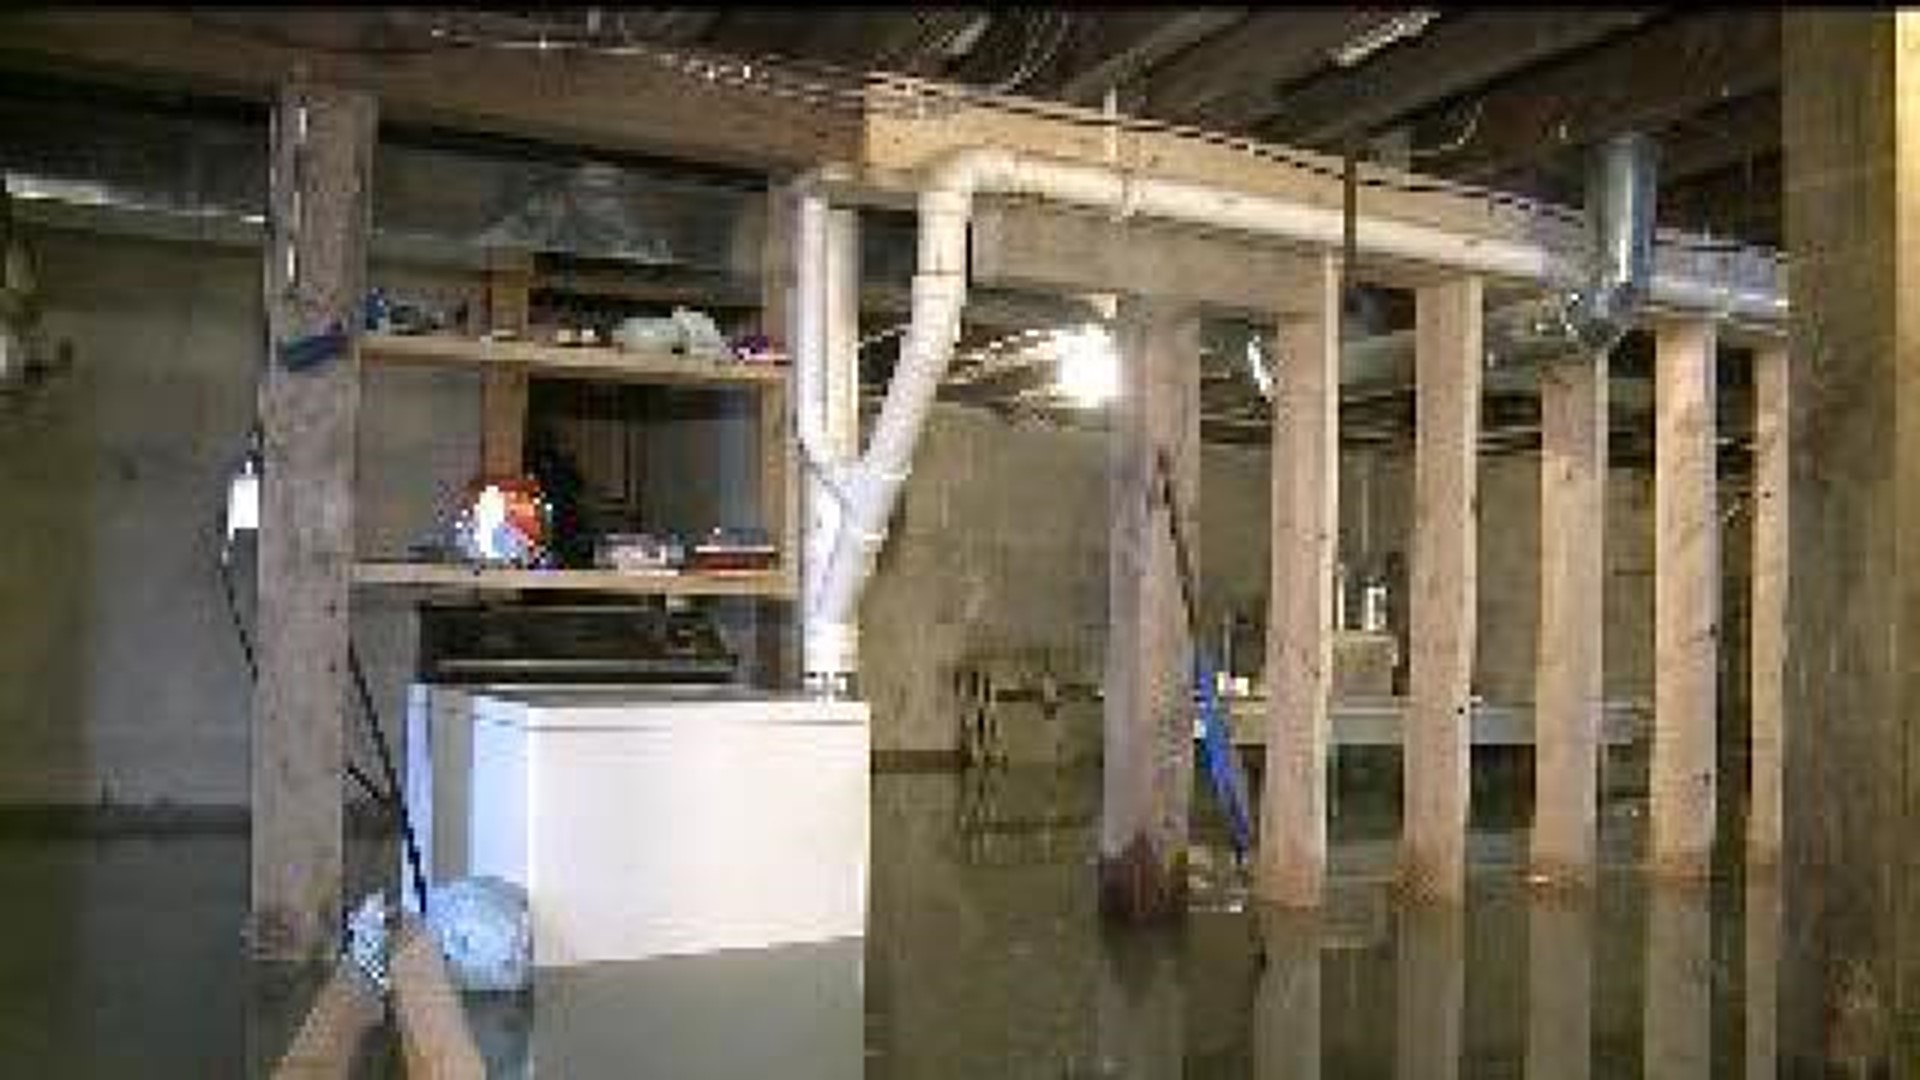 Flood Insurance Rates on the Rise